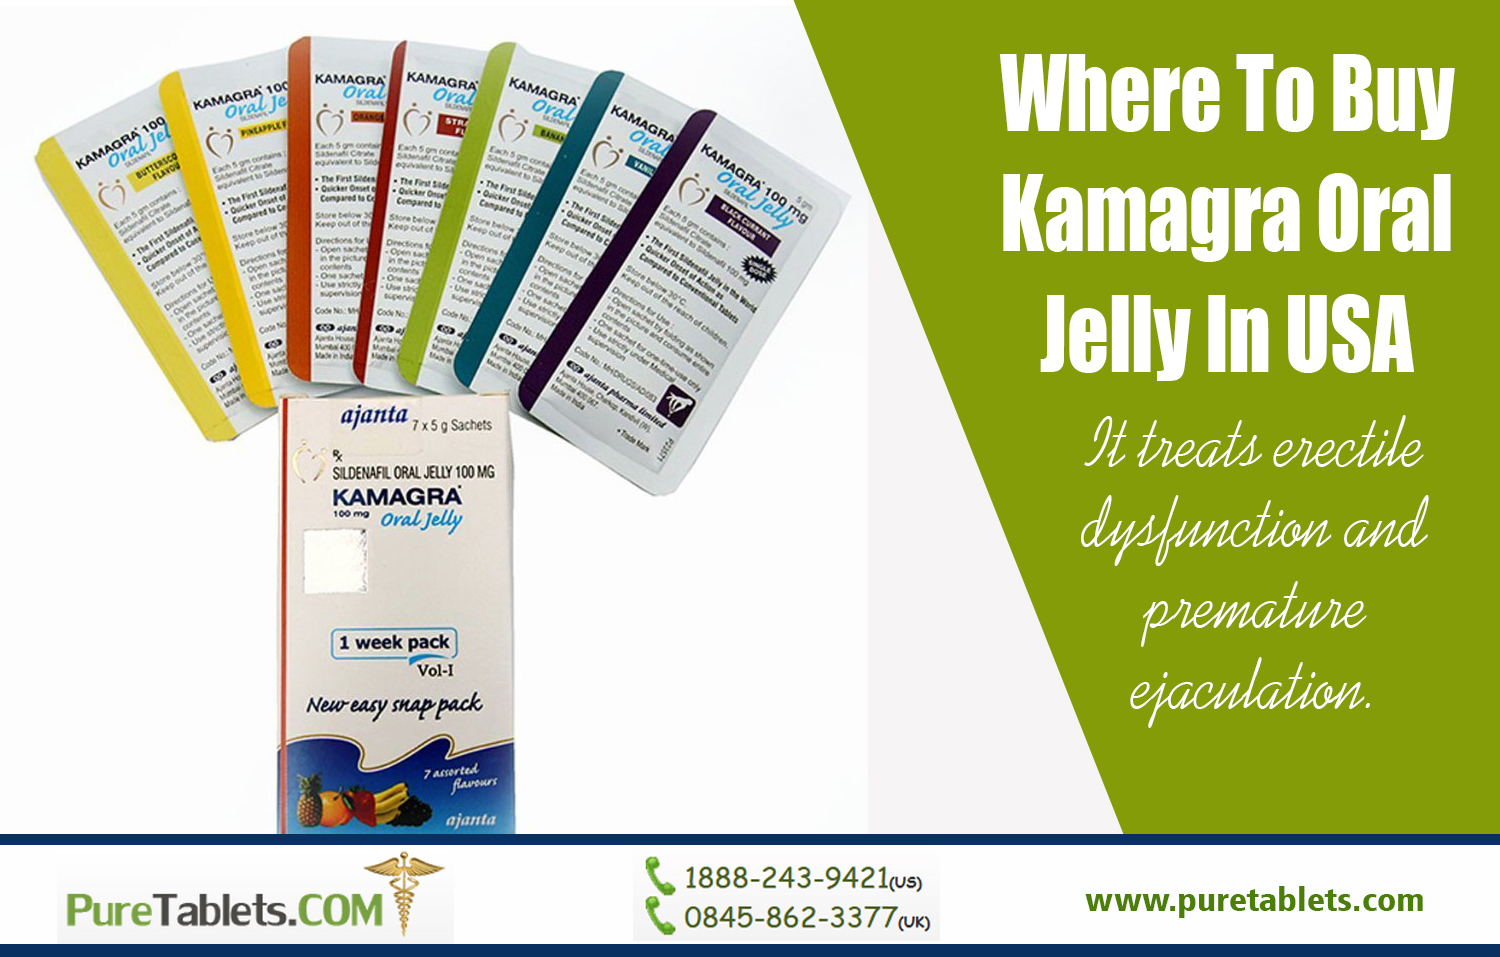 Where To Buy Kamagra Oral Jelly In USA